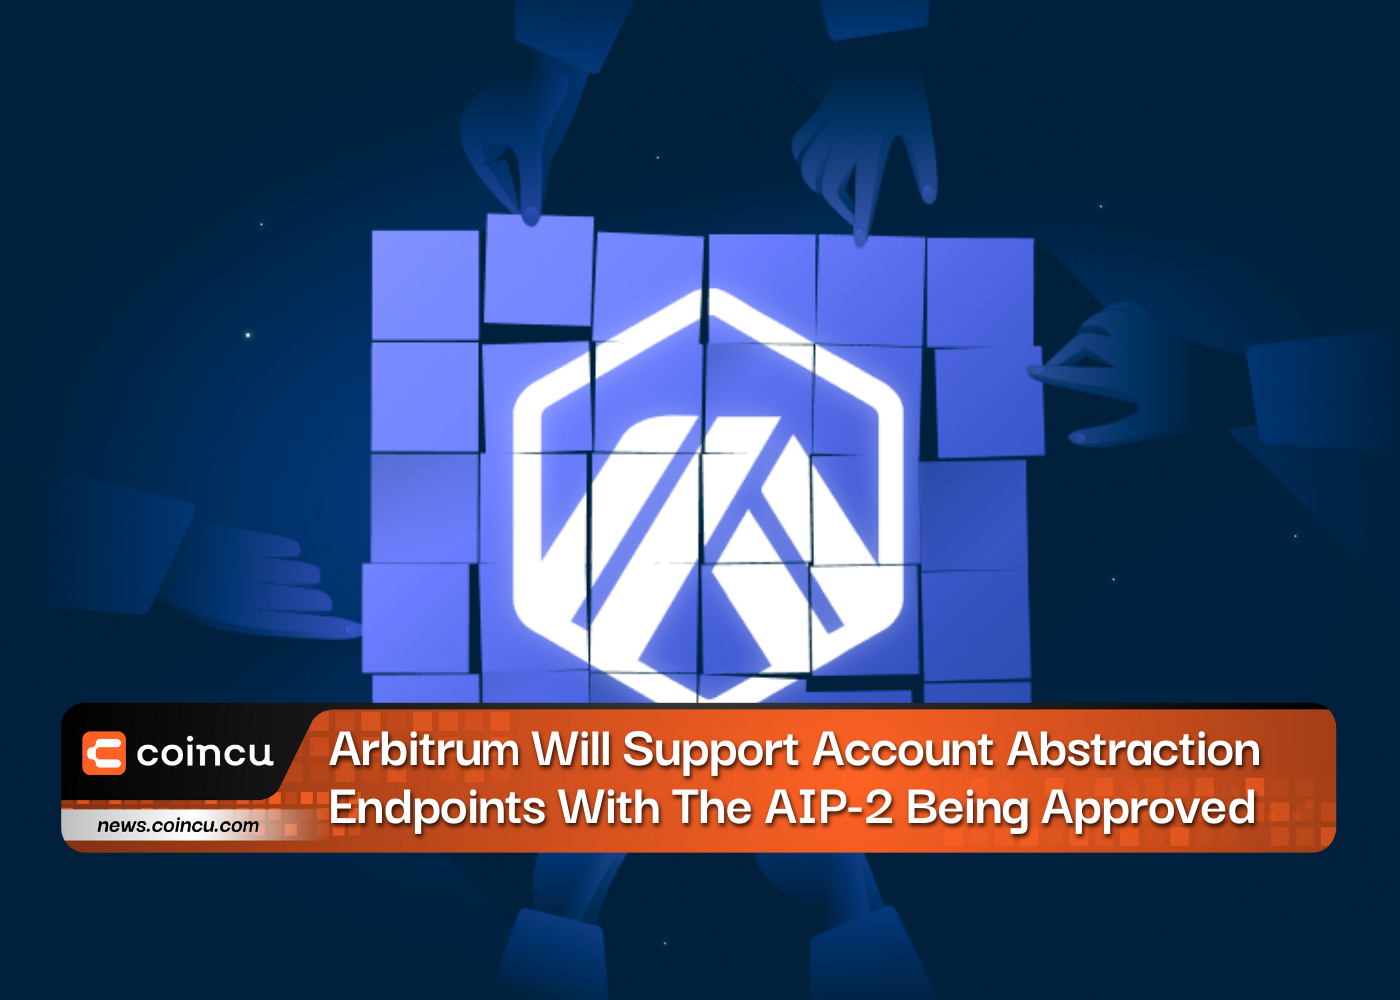 Arbitrum Will Support Account Abstraction Endpoints With The AIP-2 Being Approved